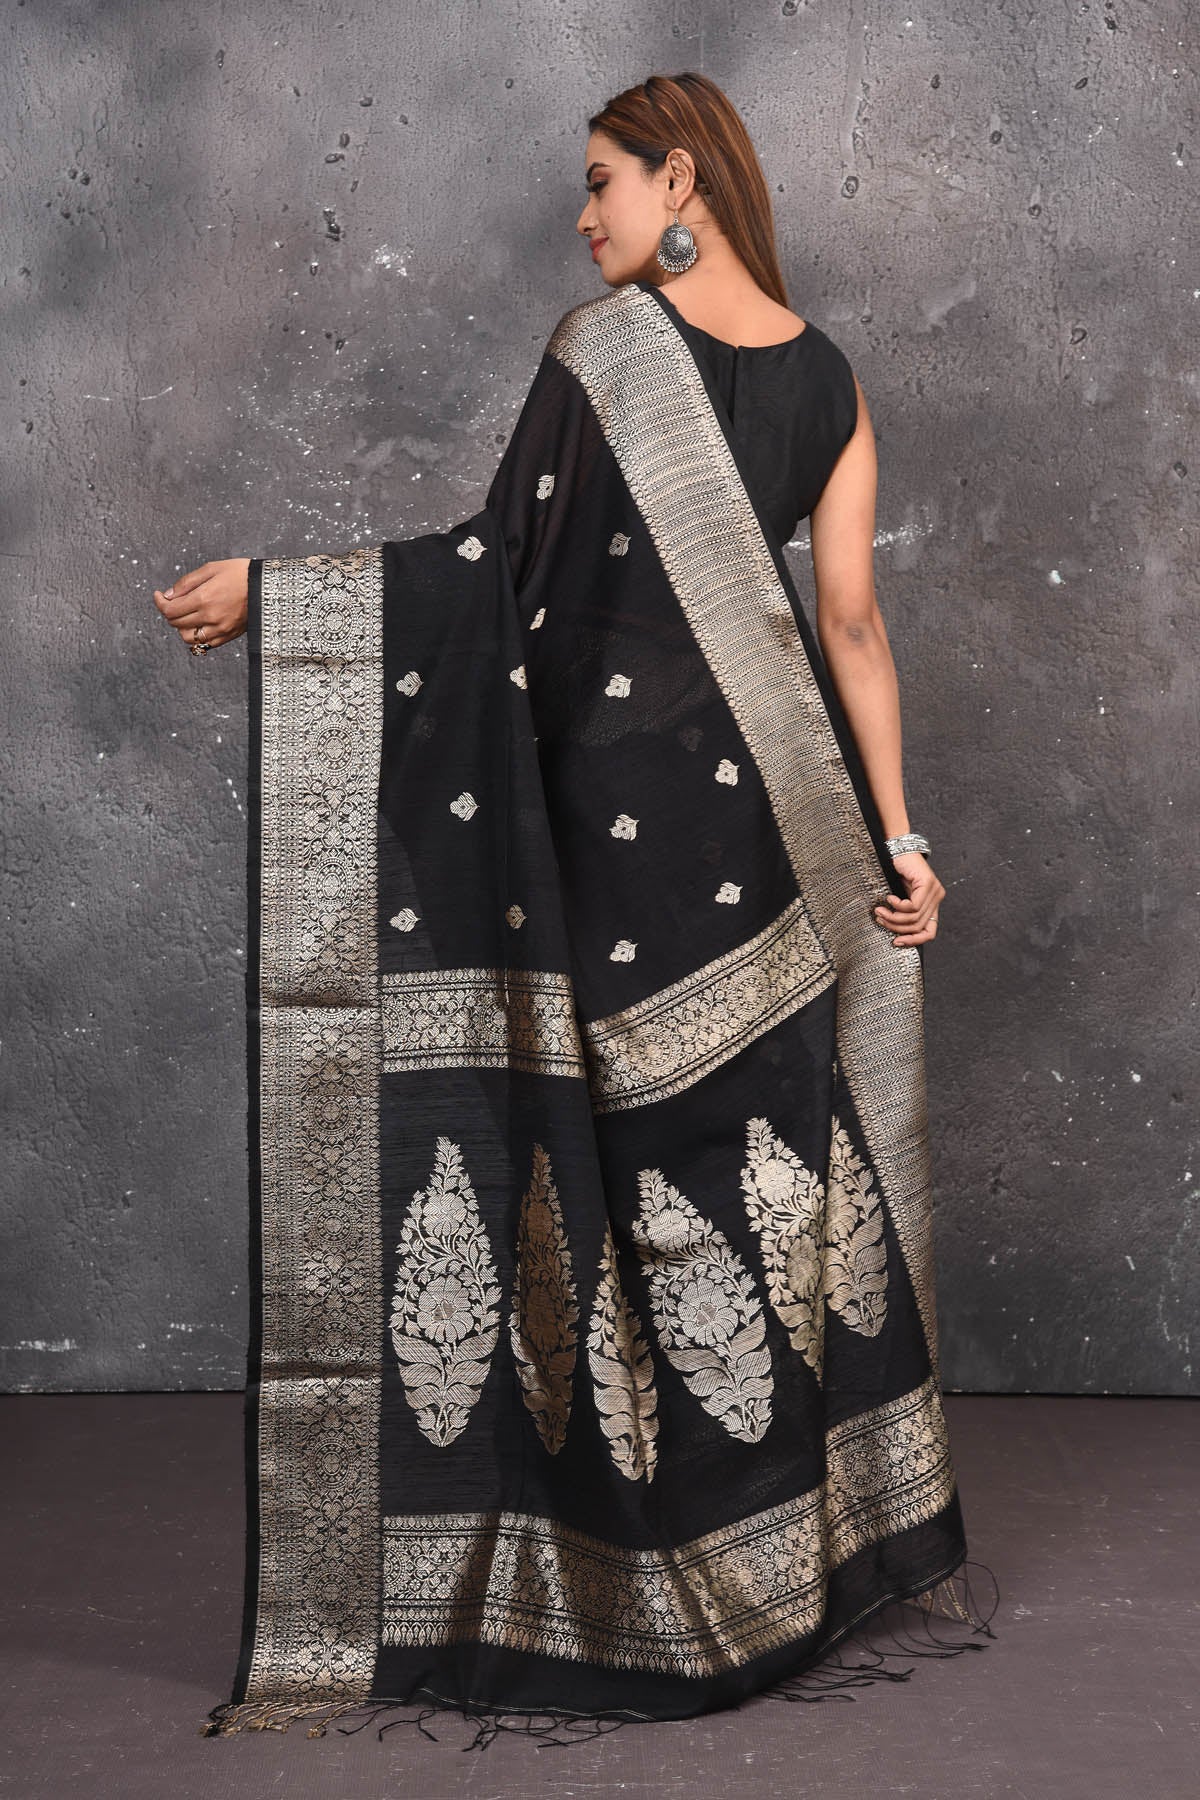 Buy elegant black zari woven matka Silk Banarasi saree with zari broad border online in USA which has crafted by skilled weaver of Banaras with elegance and grace, this saree is definitely the epitome of beauty and a must have in your collection. Buy designer handwoven banarasi brocade sari with any blouse from Pure Elegance Indian saree store in USA. -Back view with open pallu.